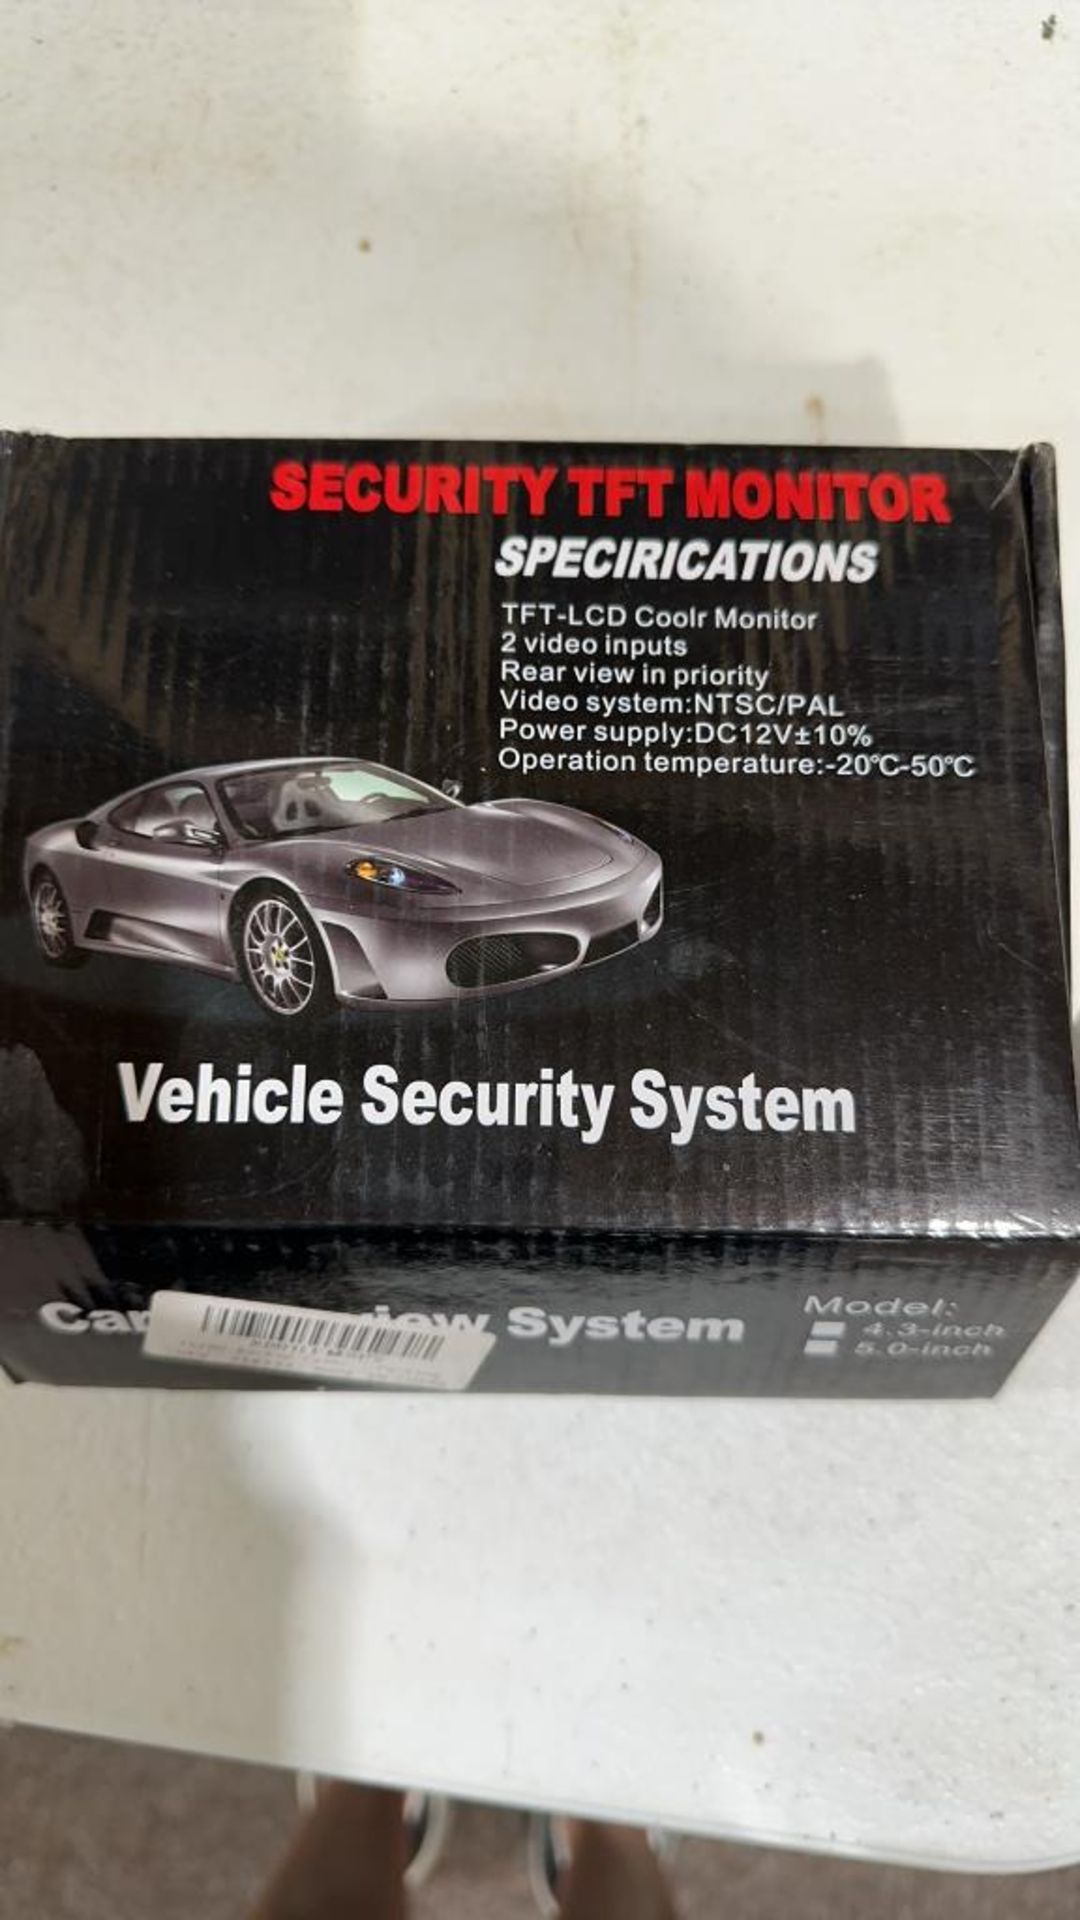 Vehicle security system - Image 3 of 12